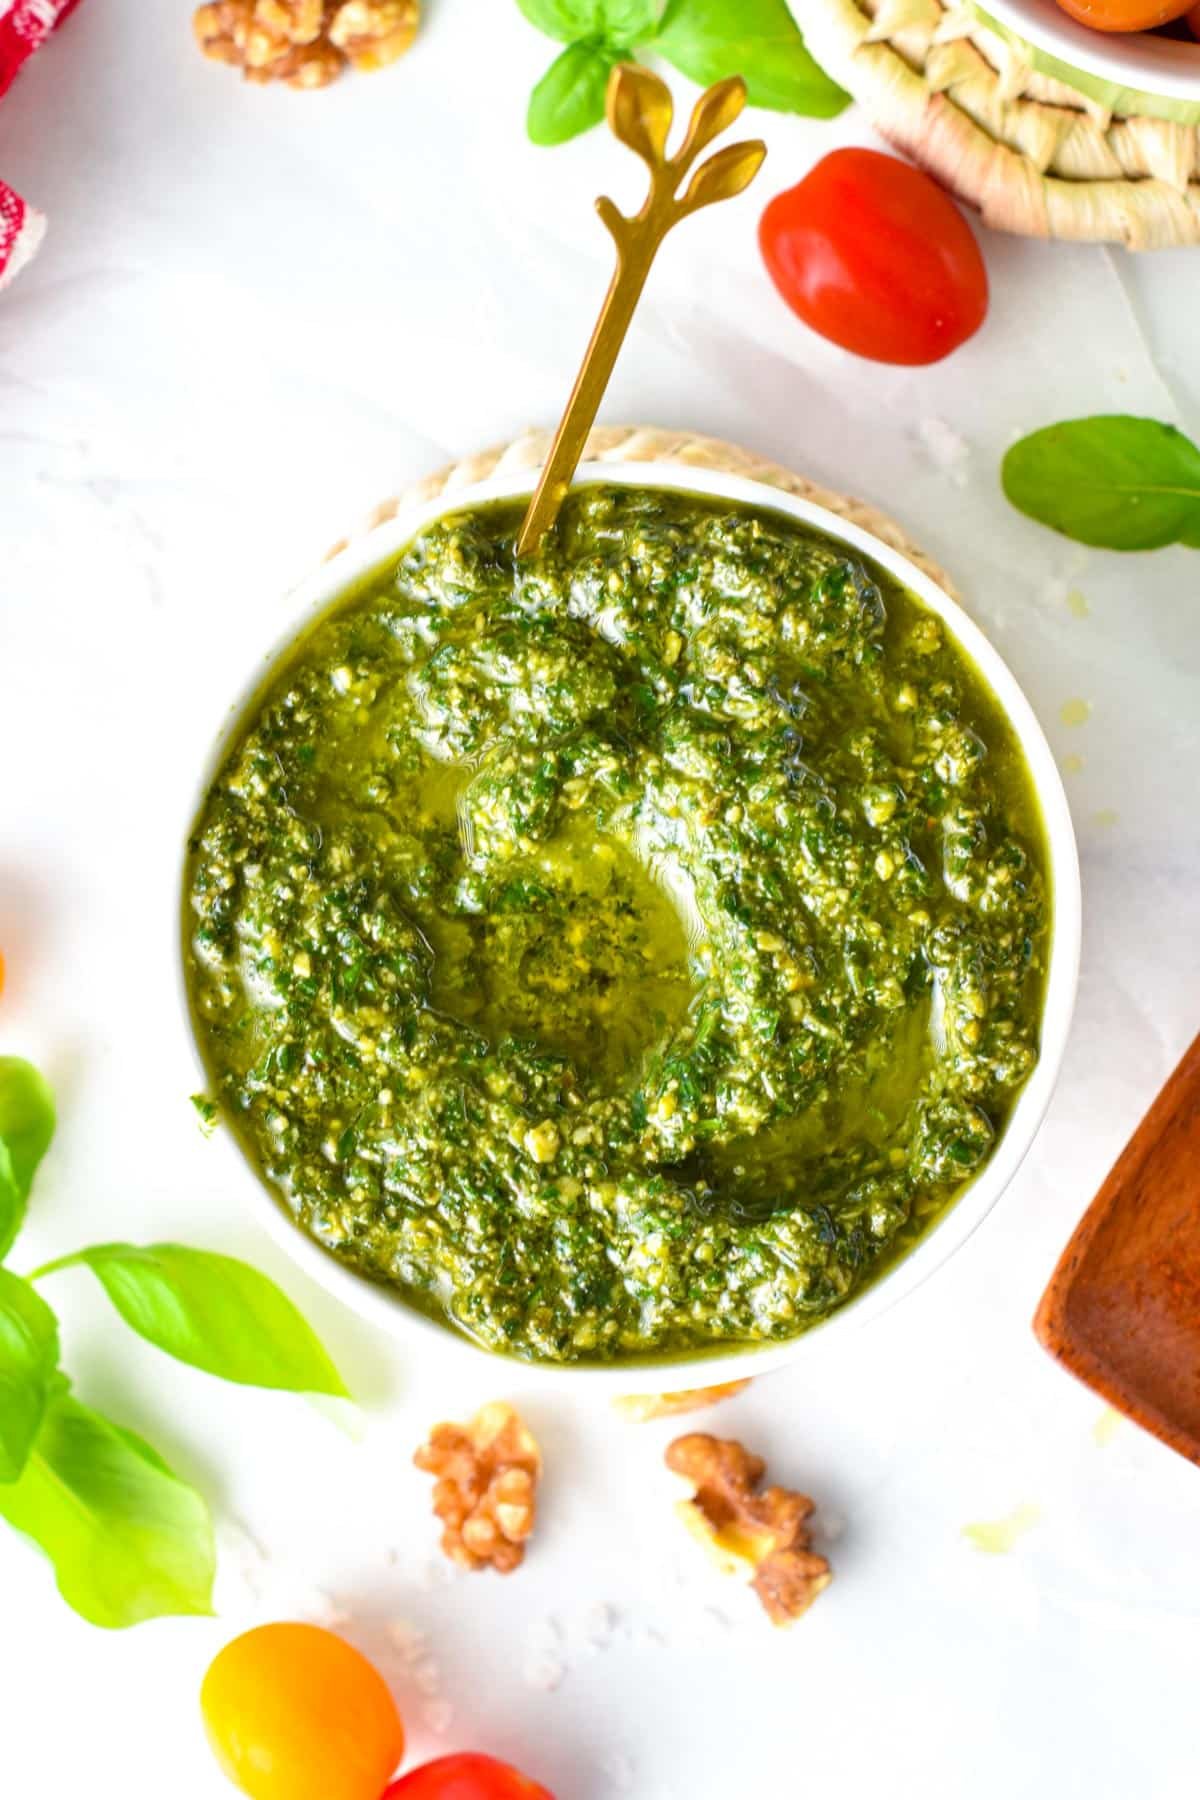 This Pesto without pine nuts is an easy healthy pesto perfect if you run out of pine nuts or have nuts allergies. Plus, this pesto recipe is ready in barely 5 minutes, and use a good amount of basil to use the overgrown herbs in your garden.This Pesto without pine nuts is an easy healthy pesto perfect if you run out of pine nuts or have nuts allergies. Plus, this pesto recipe is ready in barely 5 minutes, and use a good amount of basil to use the overgrown herbs in your garden.